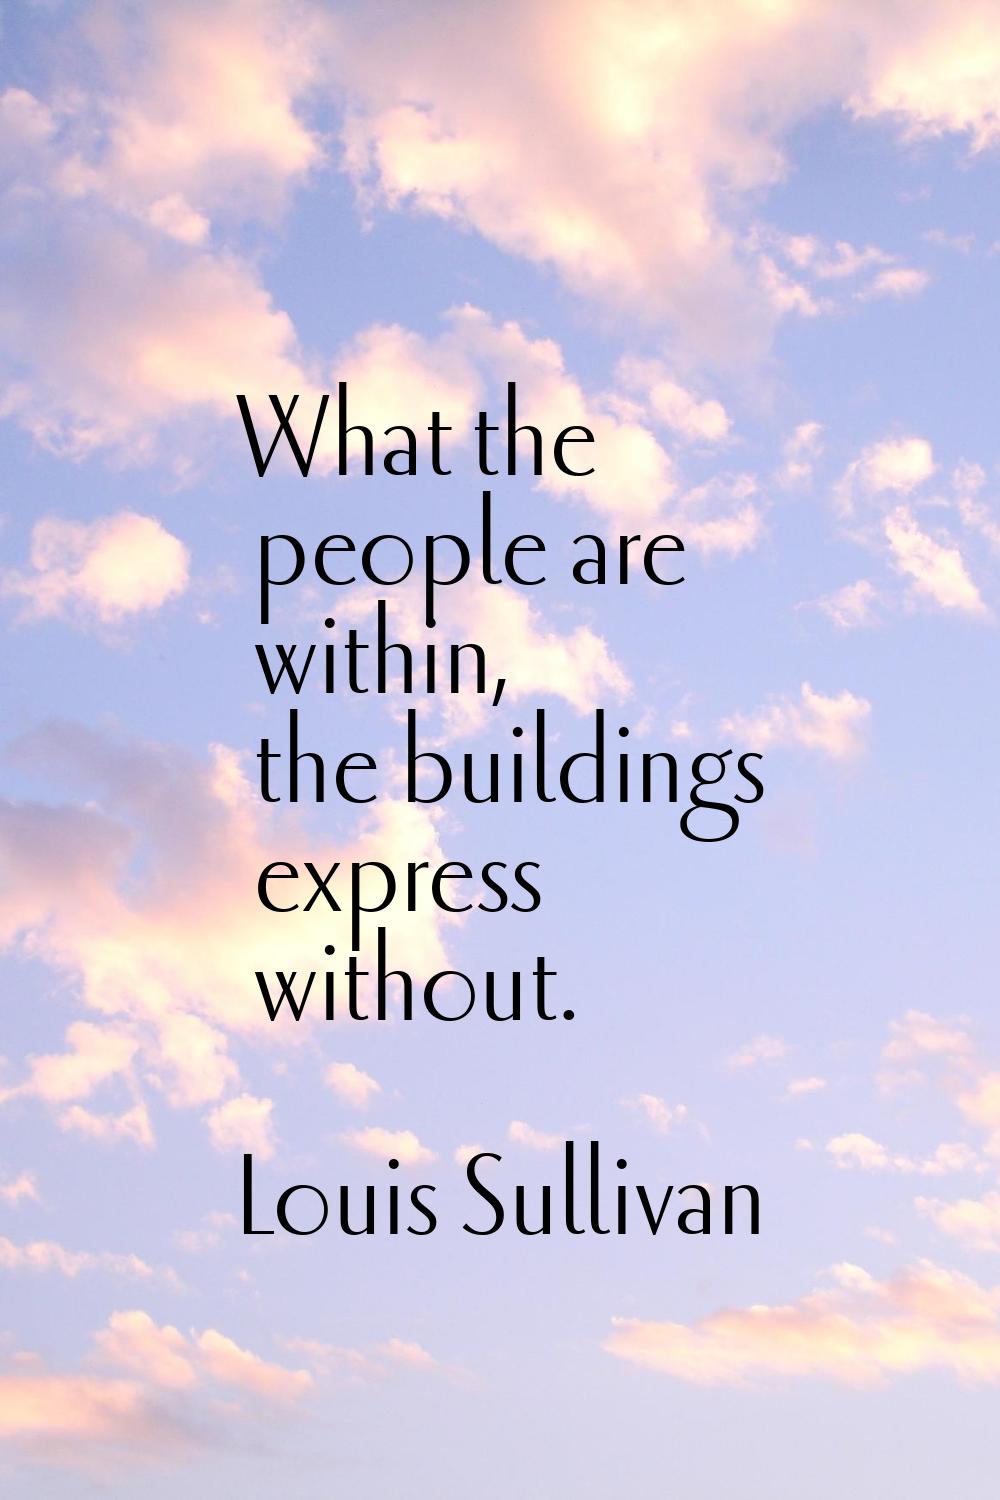 What the people are within, the buildings express without.